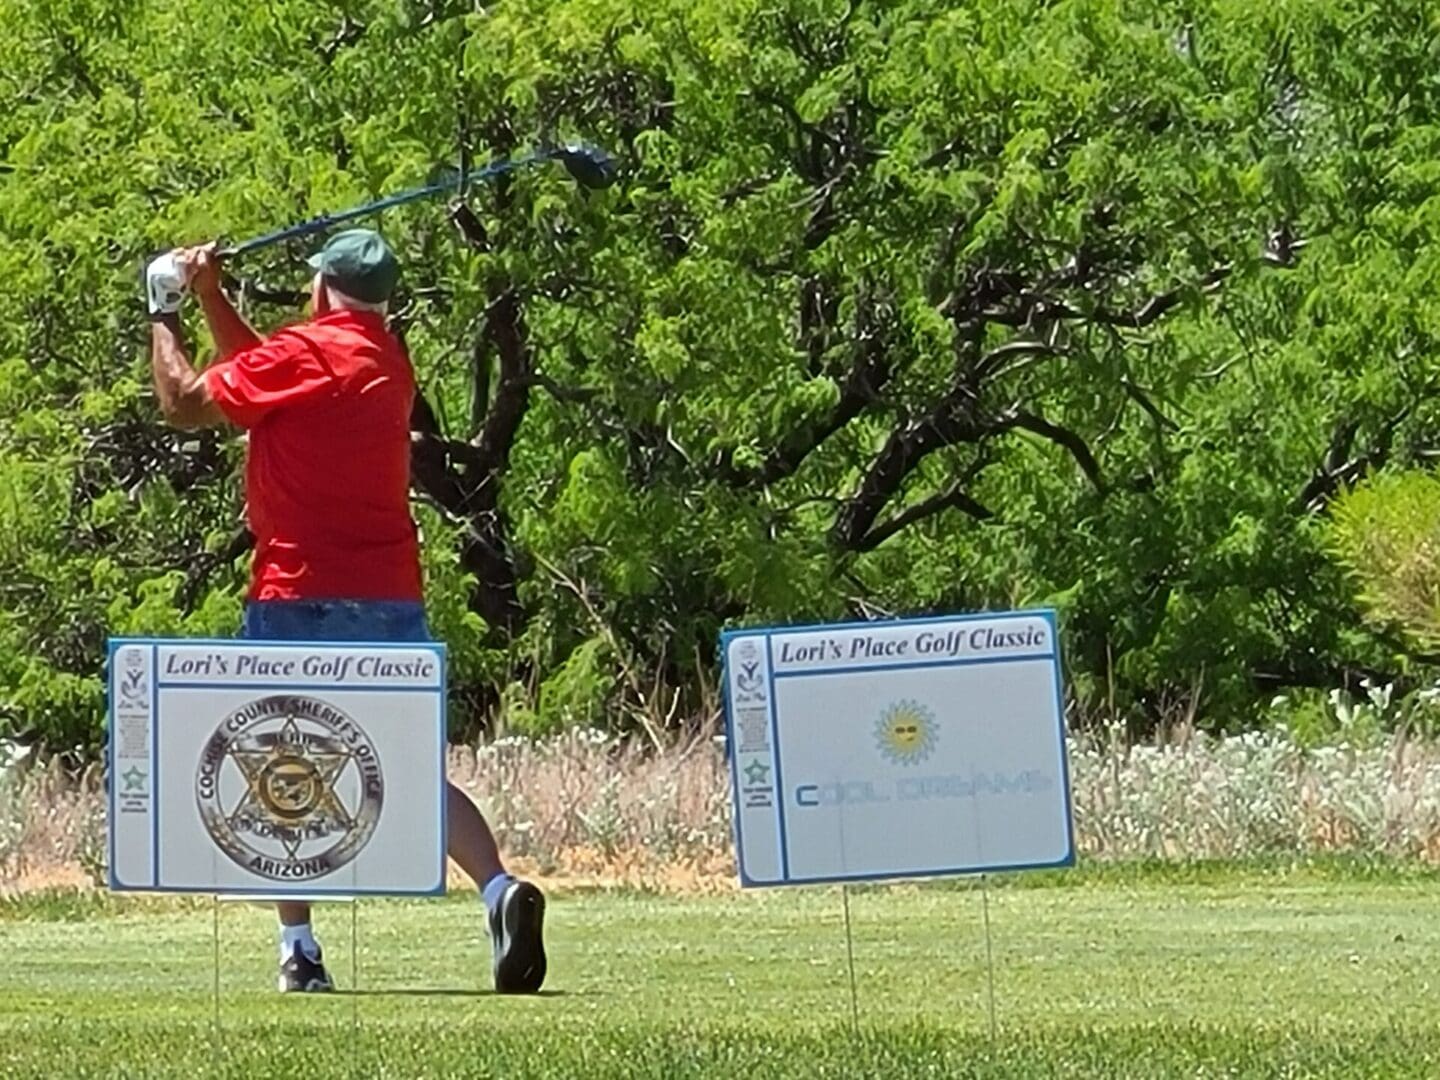 A man in red shirt swinging at a golf ball.